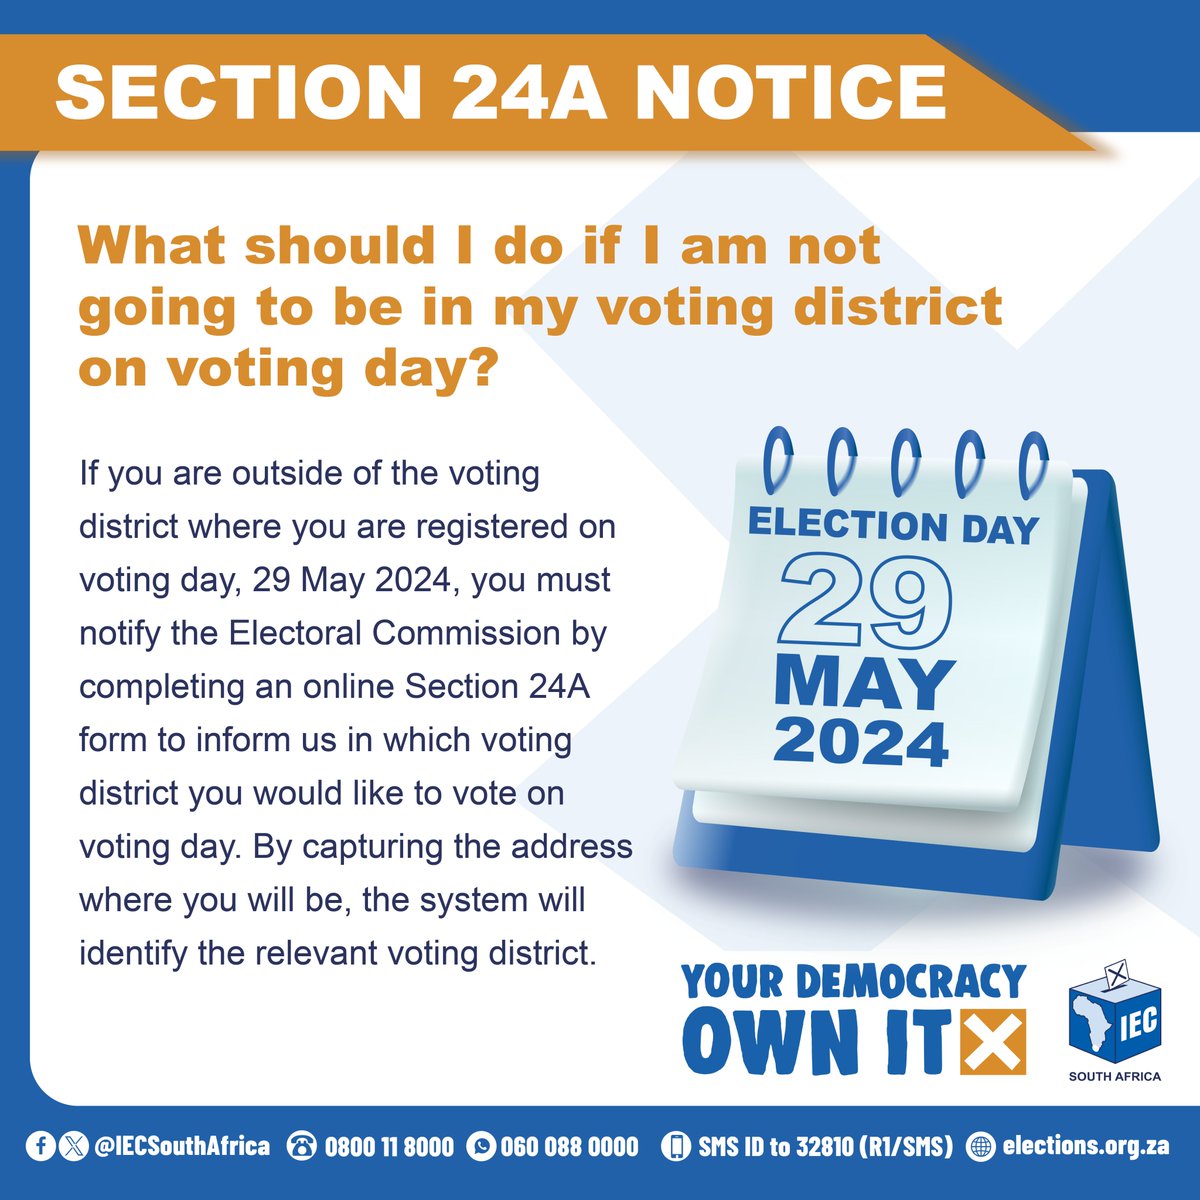 🔔You have until 17 May to inform the Commission if you'd like to vote at another voting station! Head to bit.ly/49zdtFZ or visit your local IEC office during business hours to submit your notification. #SAelections24